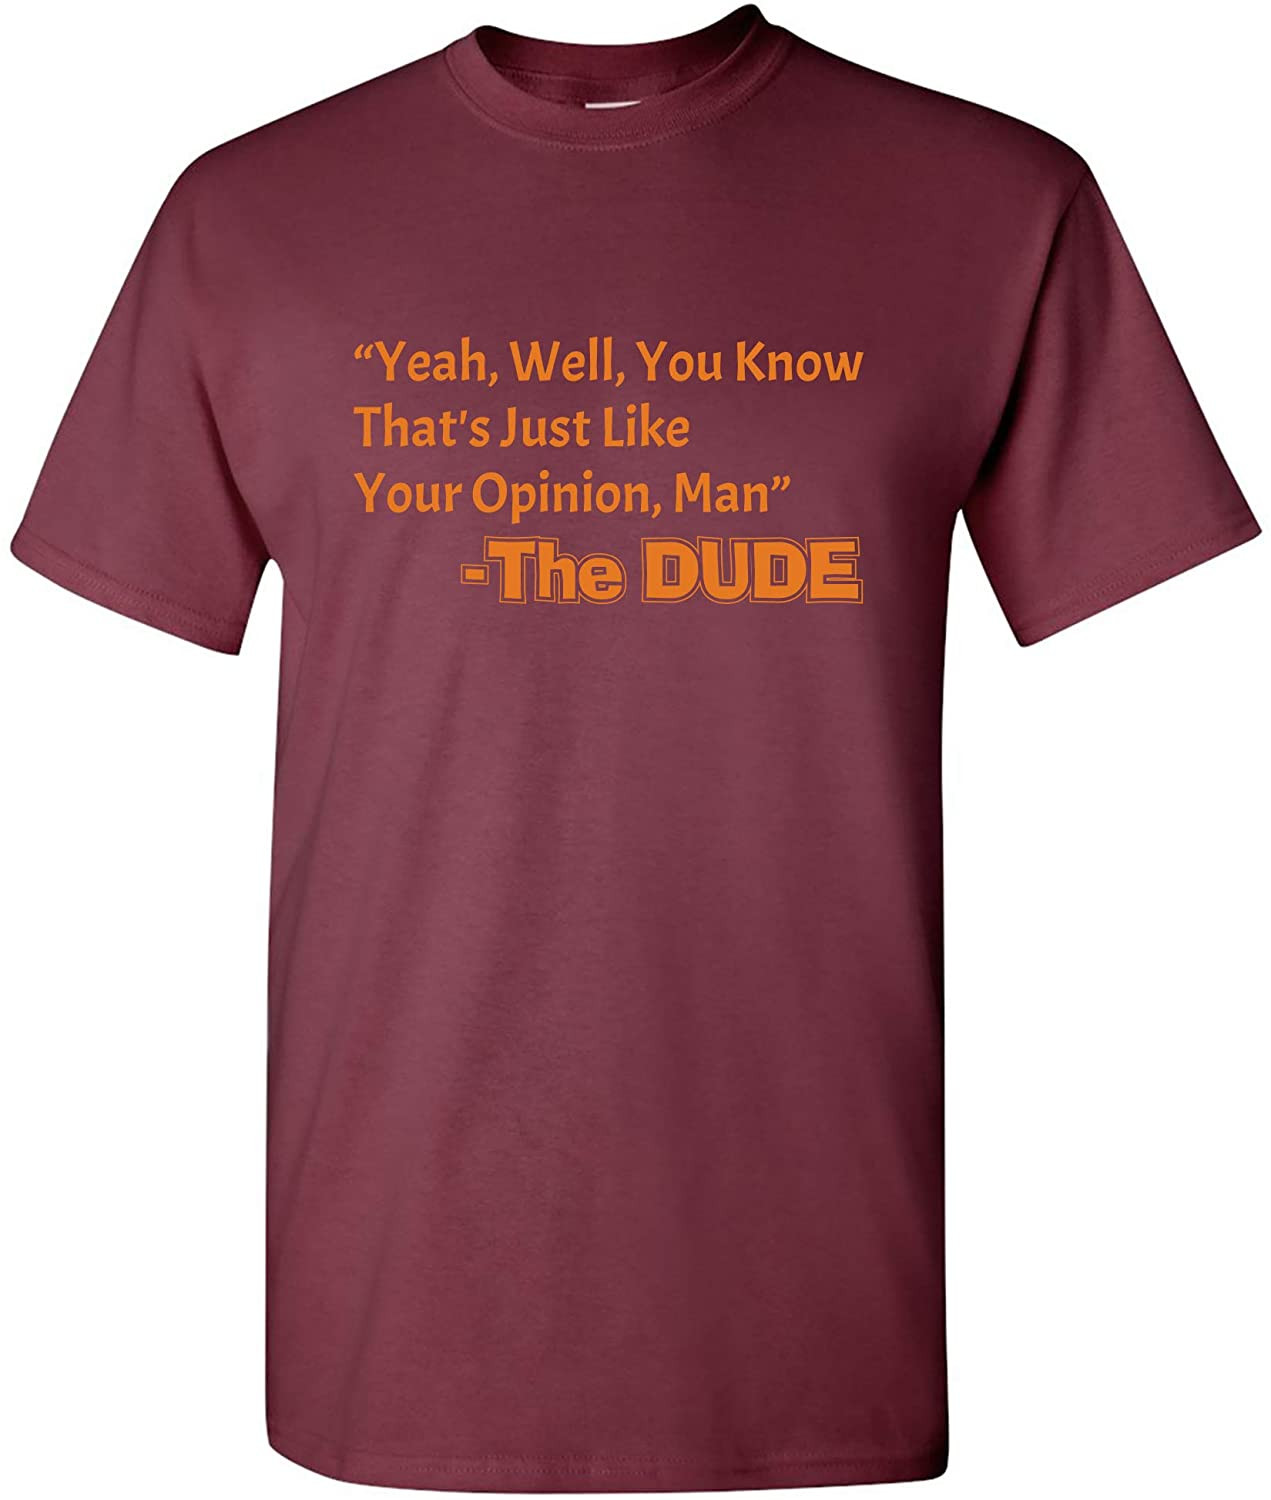 That's Just Like Your Opinion, Man - Cult Classic Dude Movie T-Shirt